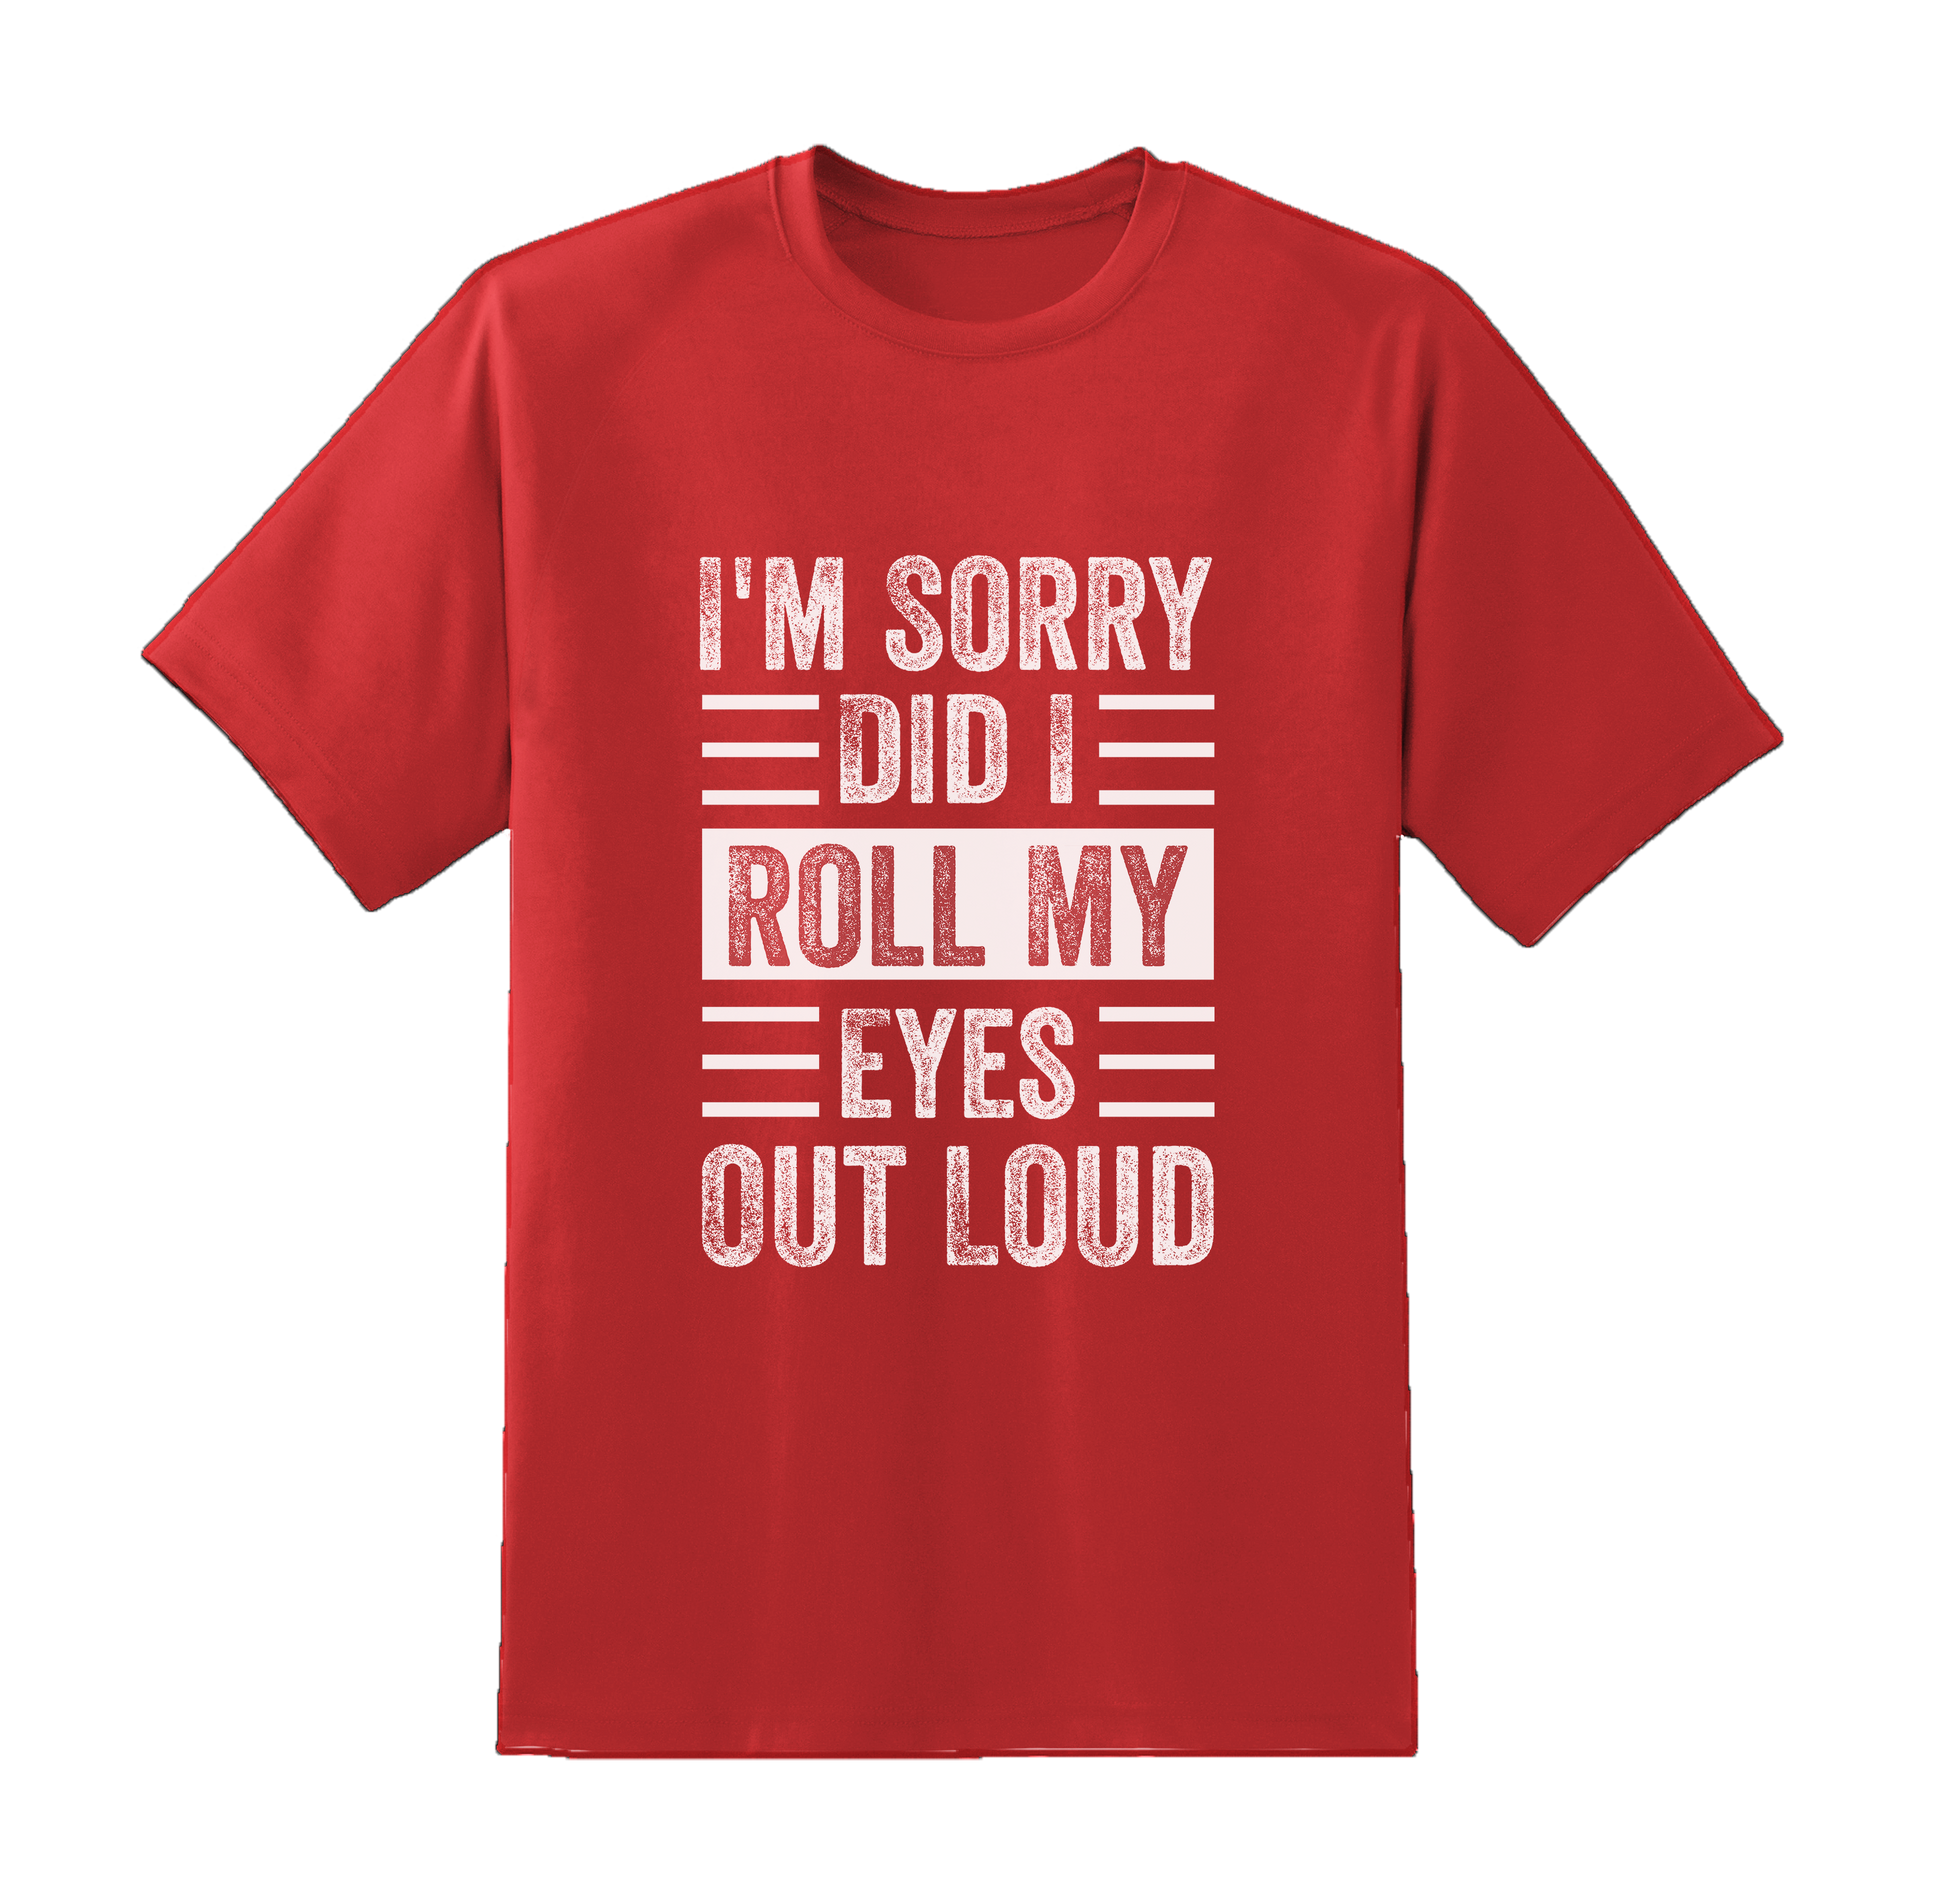 Sorry, Did I Roll My Eyes Out Loud Tee